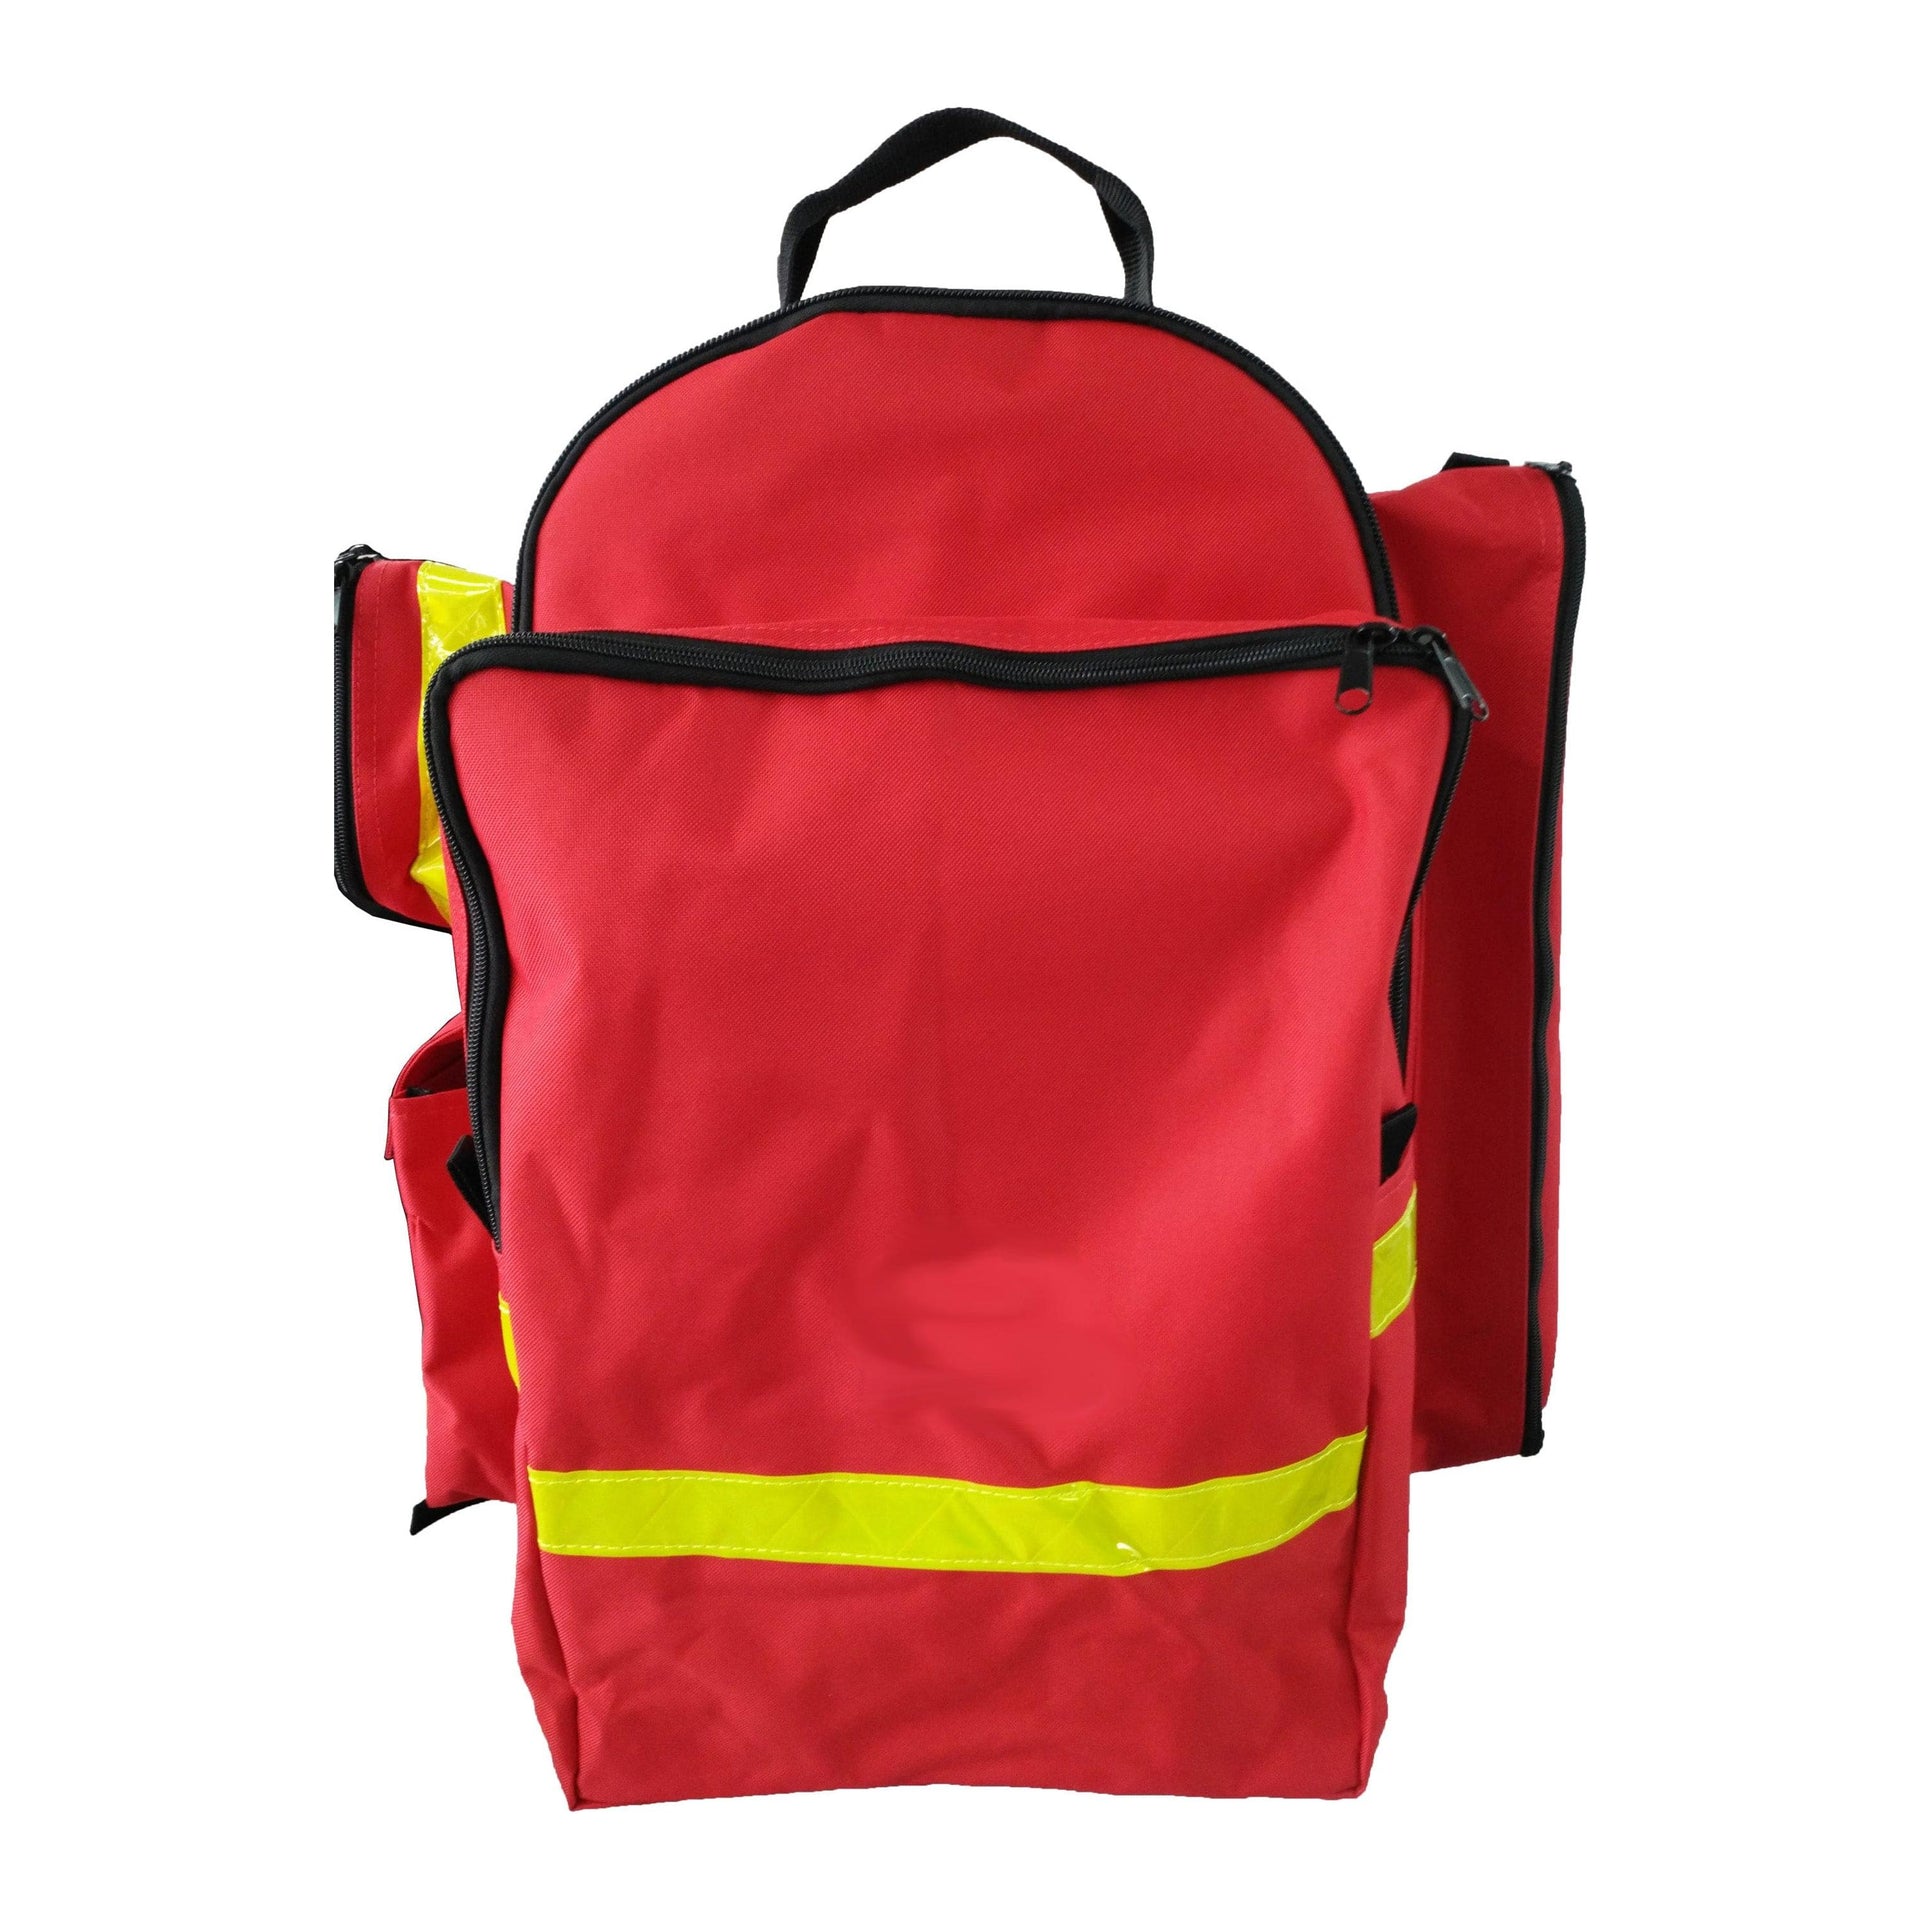 Paramedic Shop Add-Tech Pty Ltd Pouch Red Deluxe Resuscitation Backpack - BAG ONLY